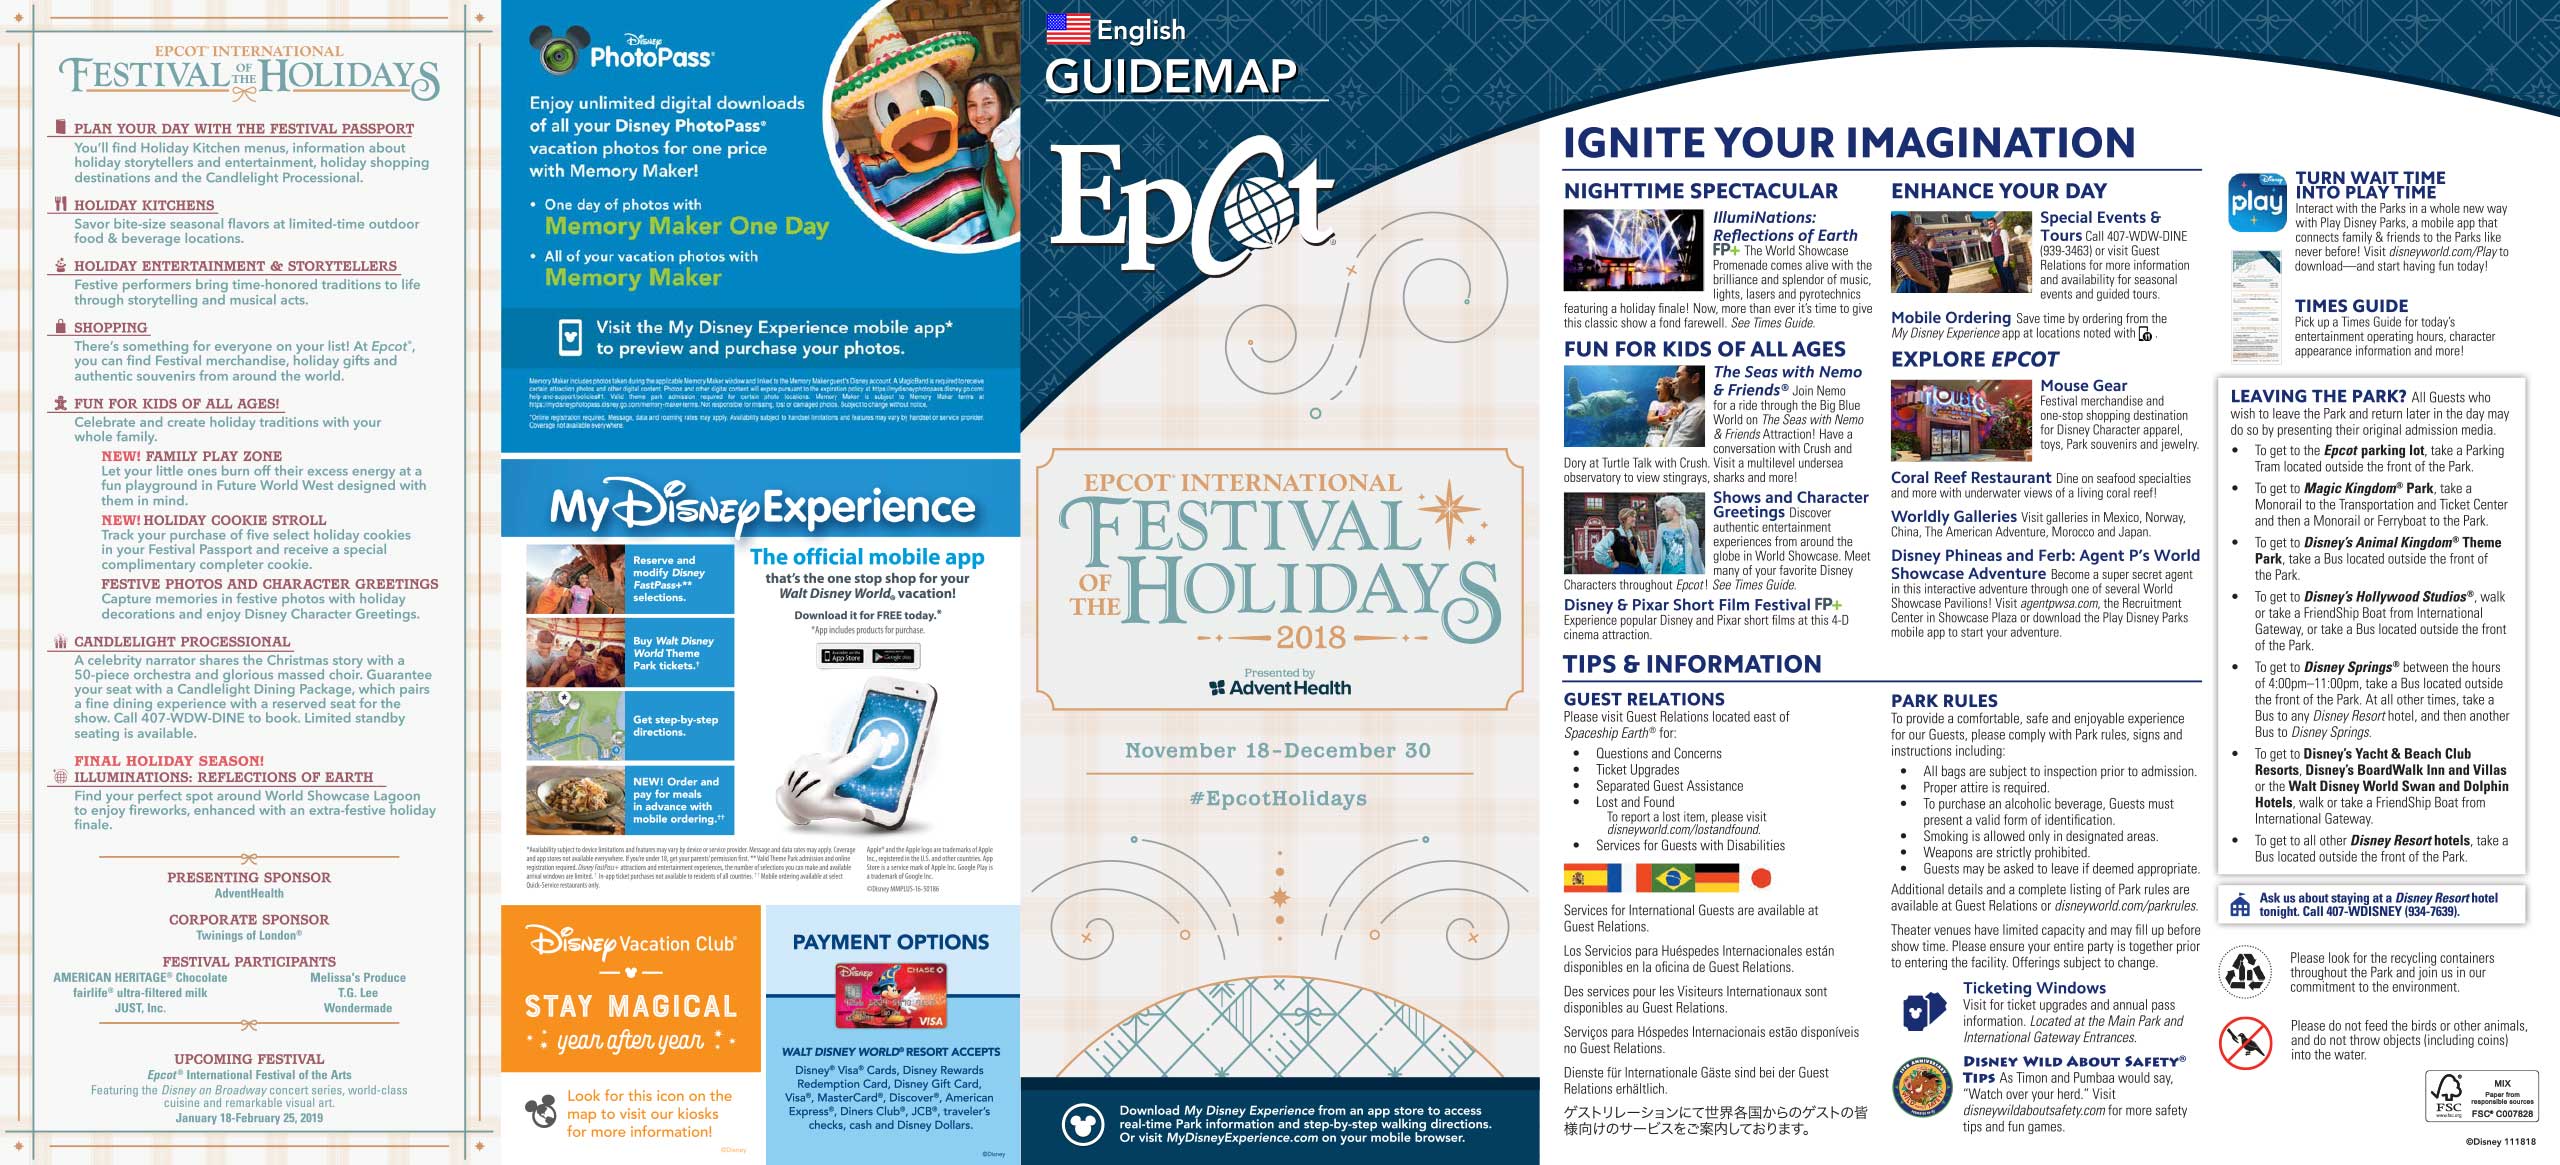 2018 Epcot Festival of the Holidays guide map - Front